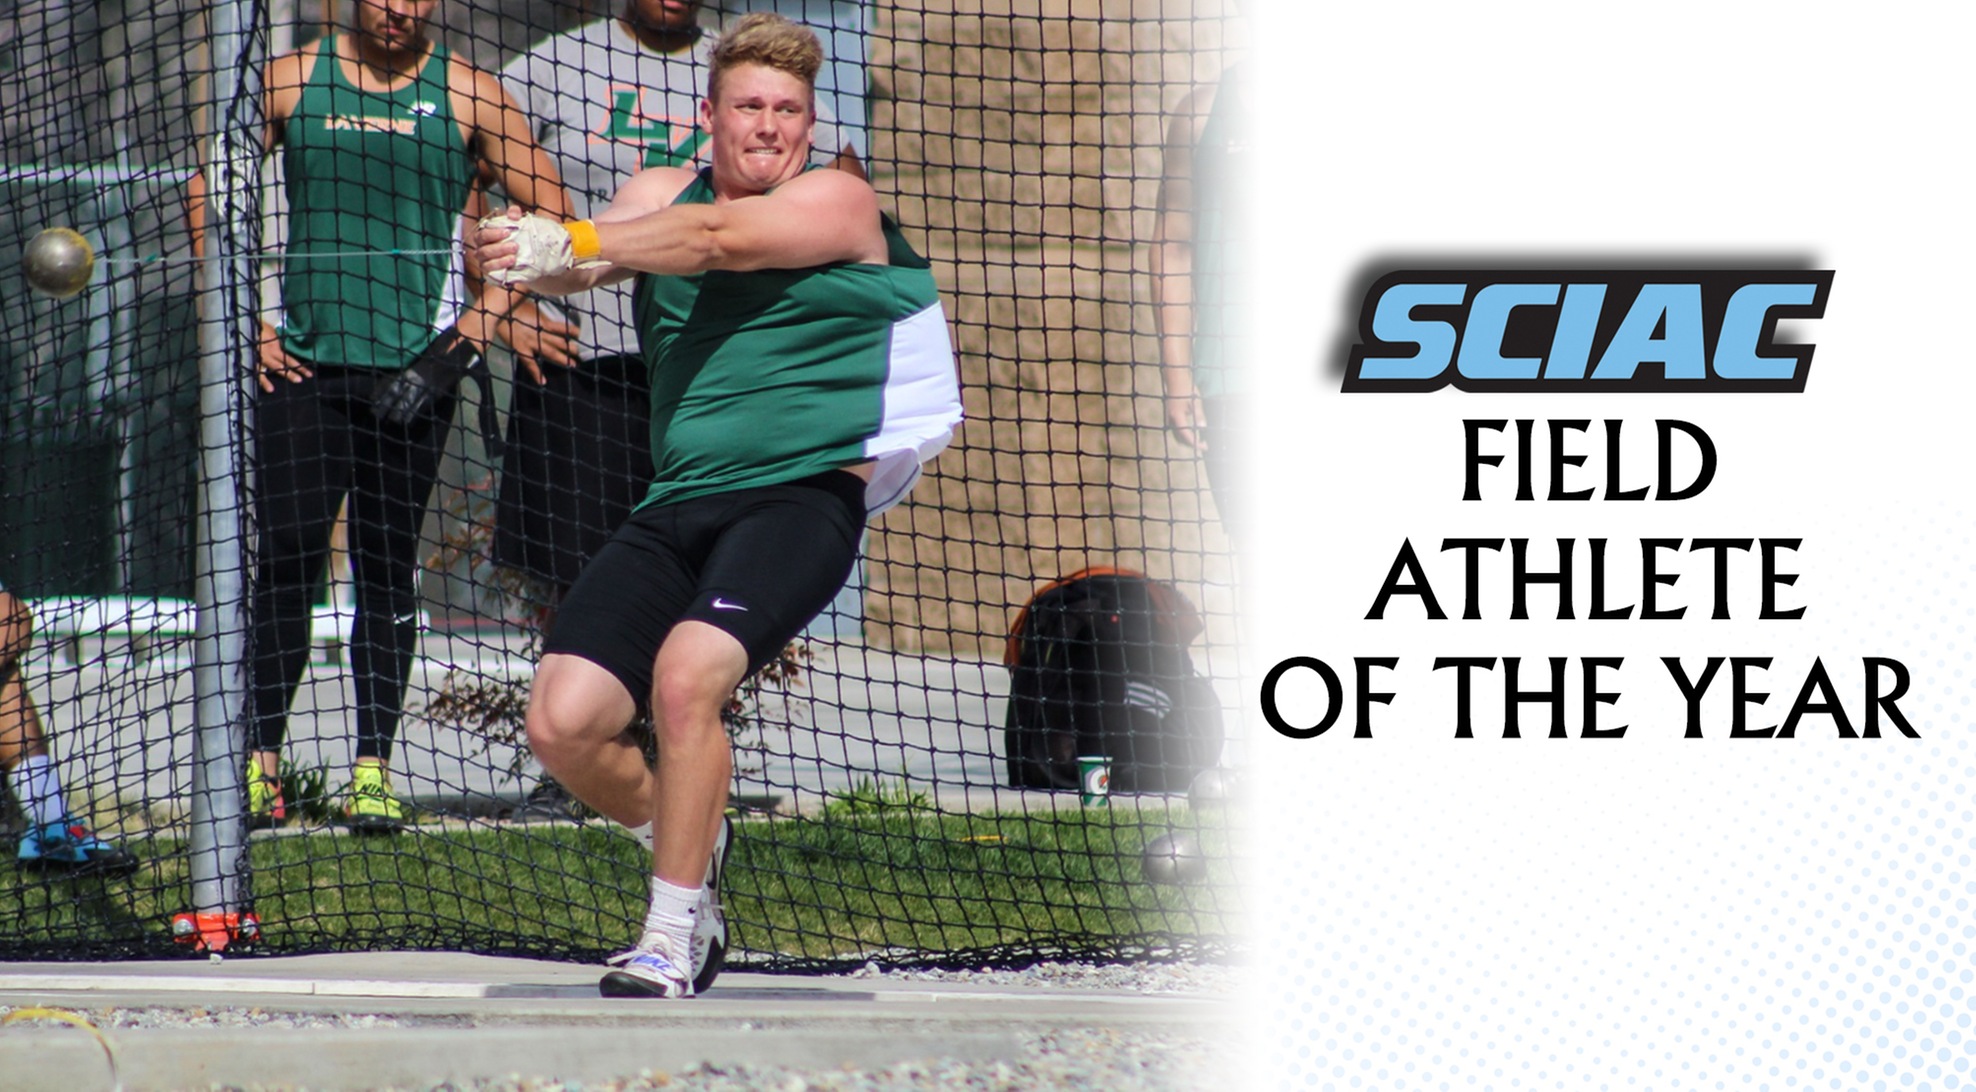 Randall named SCIAC Field Athlete of the Year